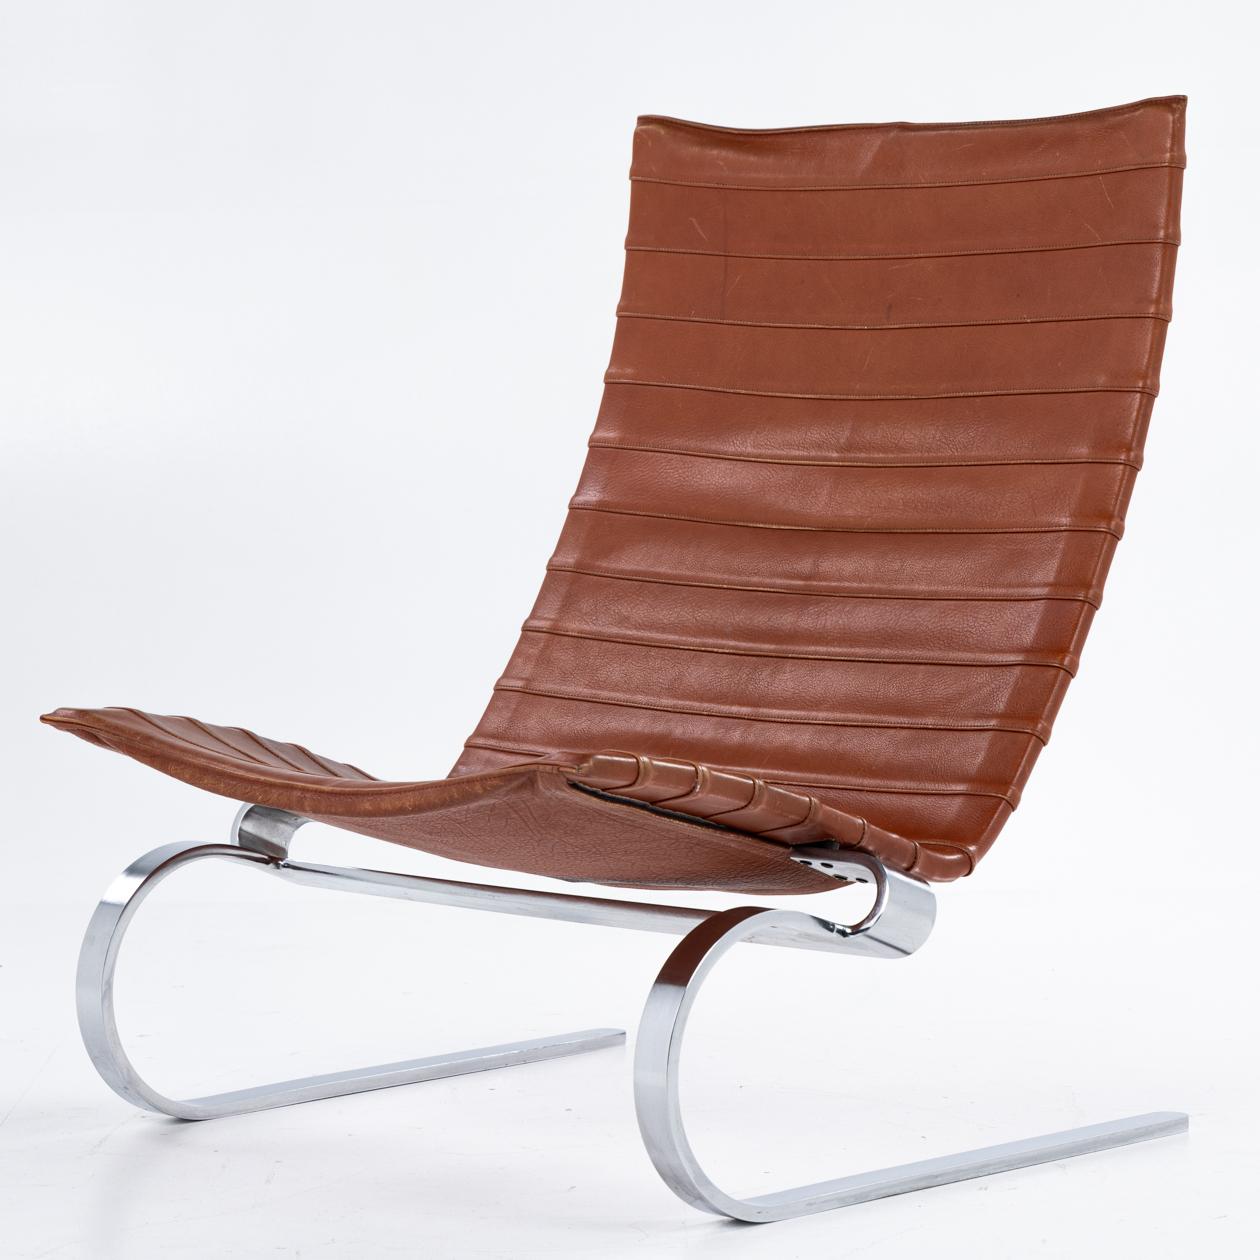 Pair of PK 20 easy chairs with patinated cognac leather. Poul Kjærhlm / E. Kold Christensen